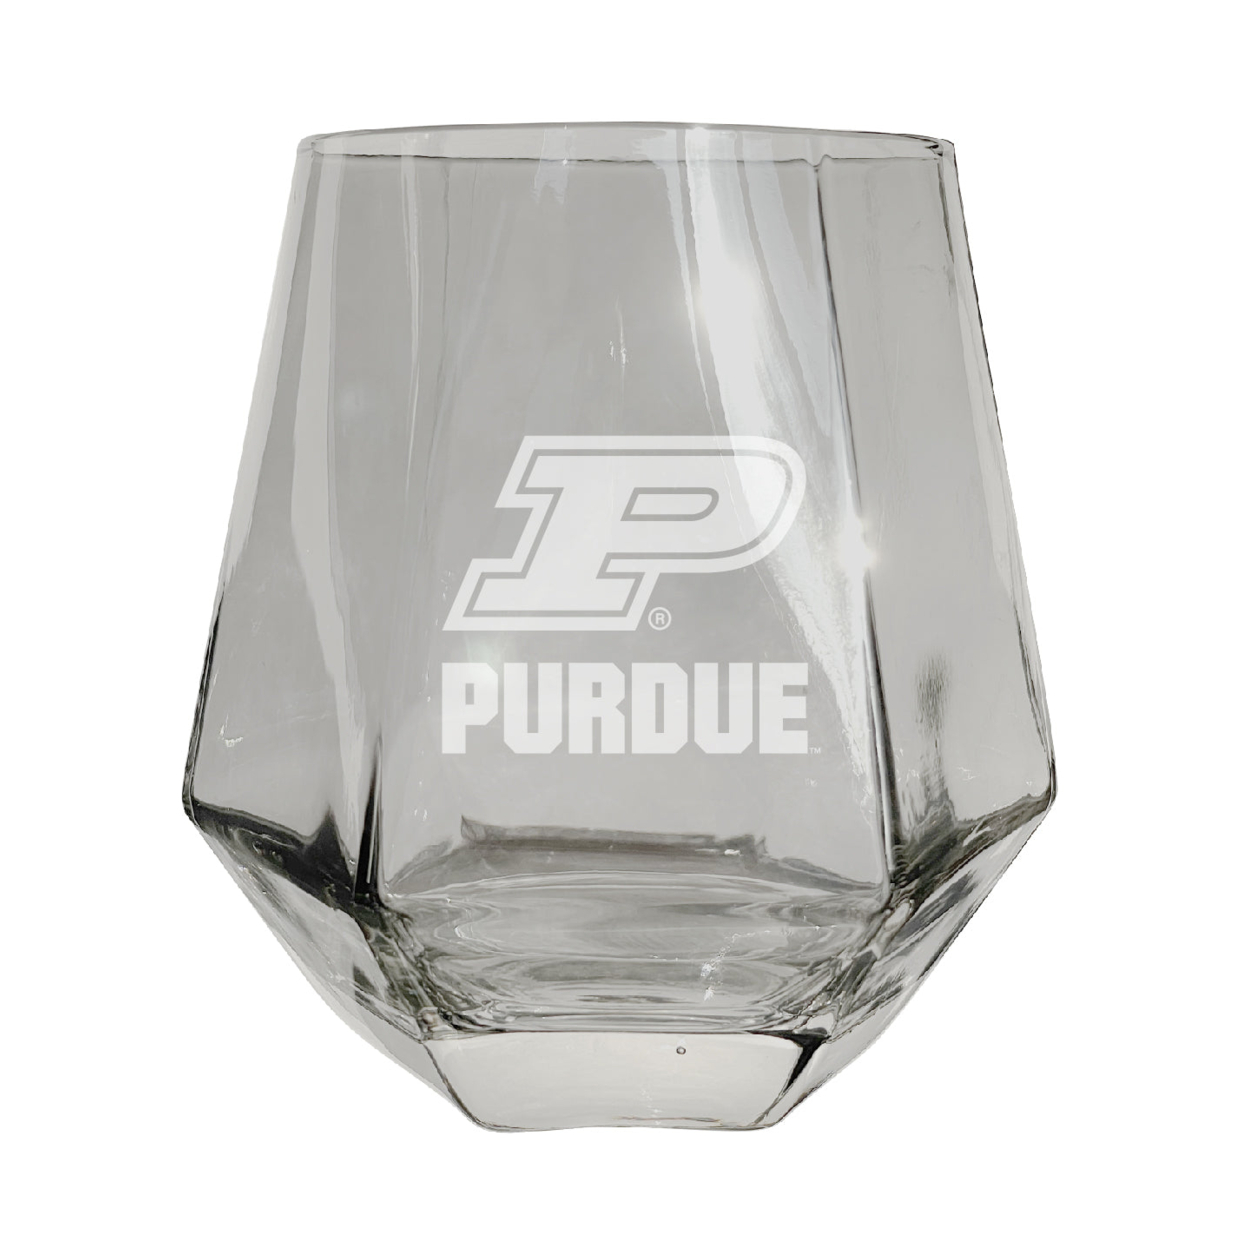 Purdue Boilermakers Etched Diamond Cut Stemless 10 Ounce Wine Glass Clear